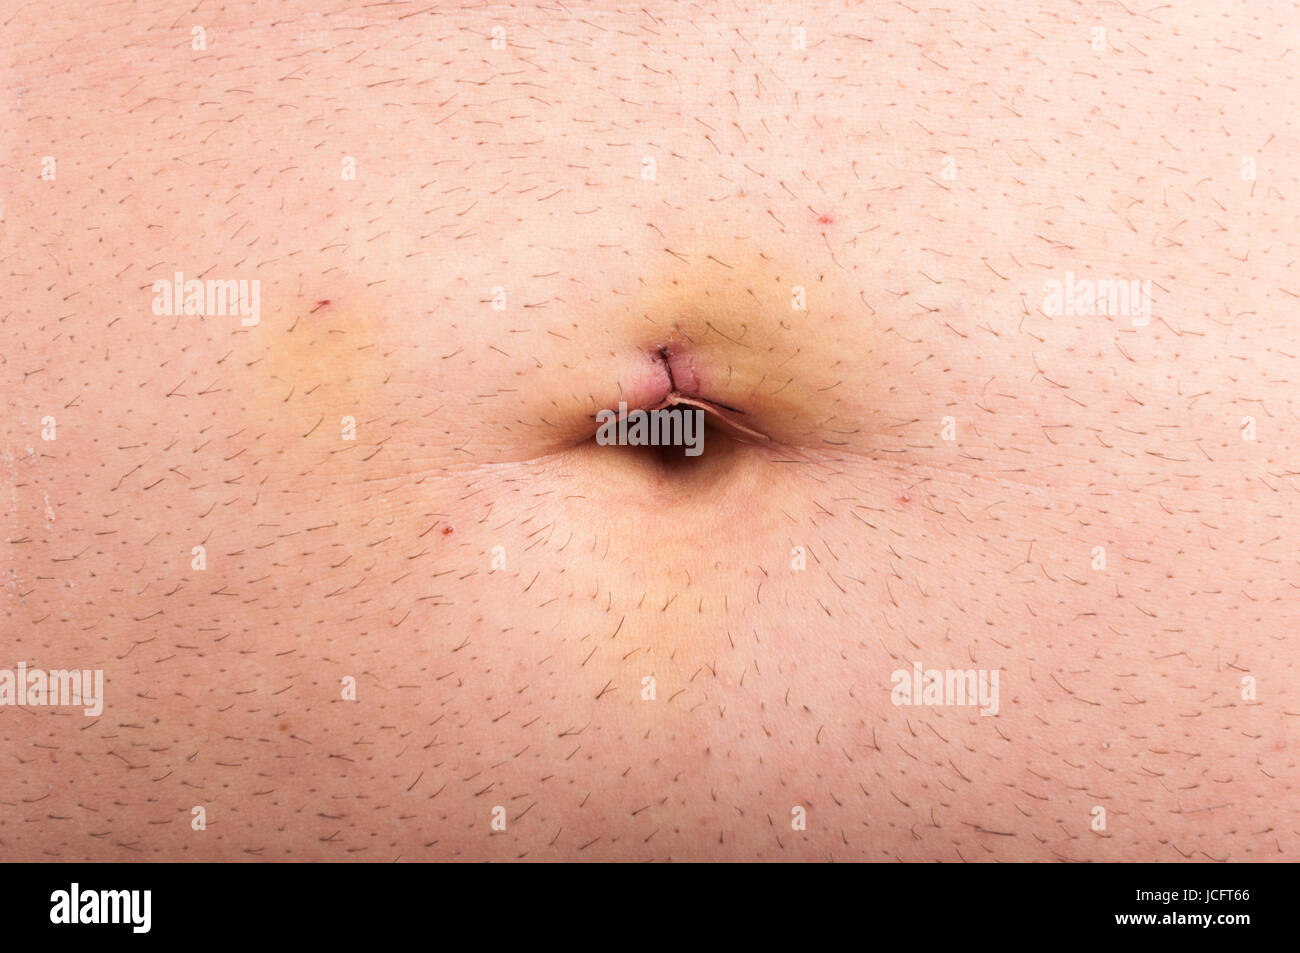 Closeup of belly stitch after laparoscopic surgery of gallbladder removal Stock Photo